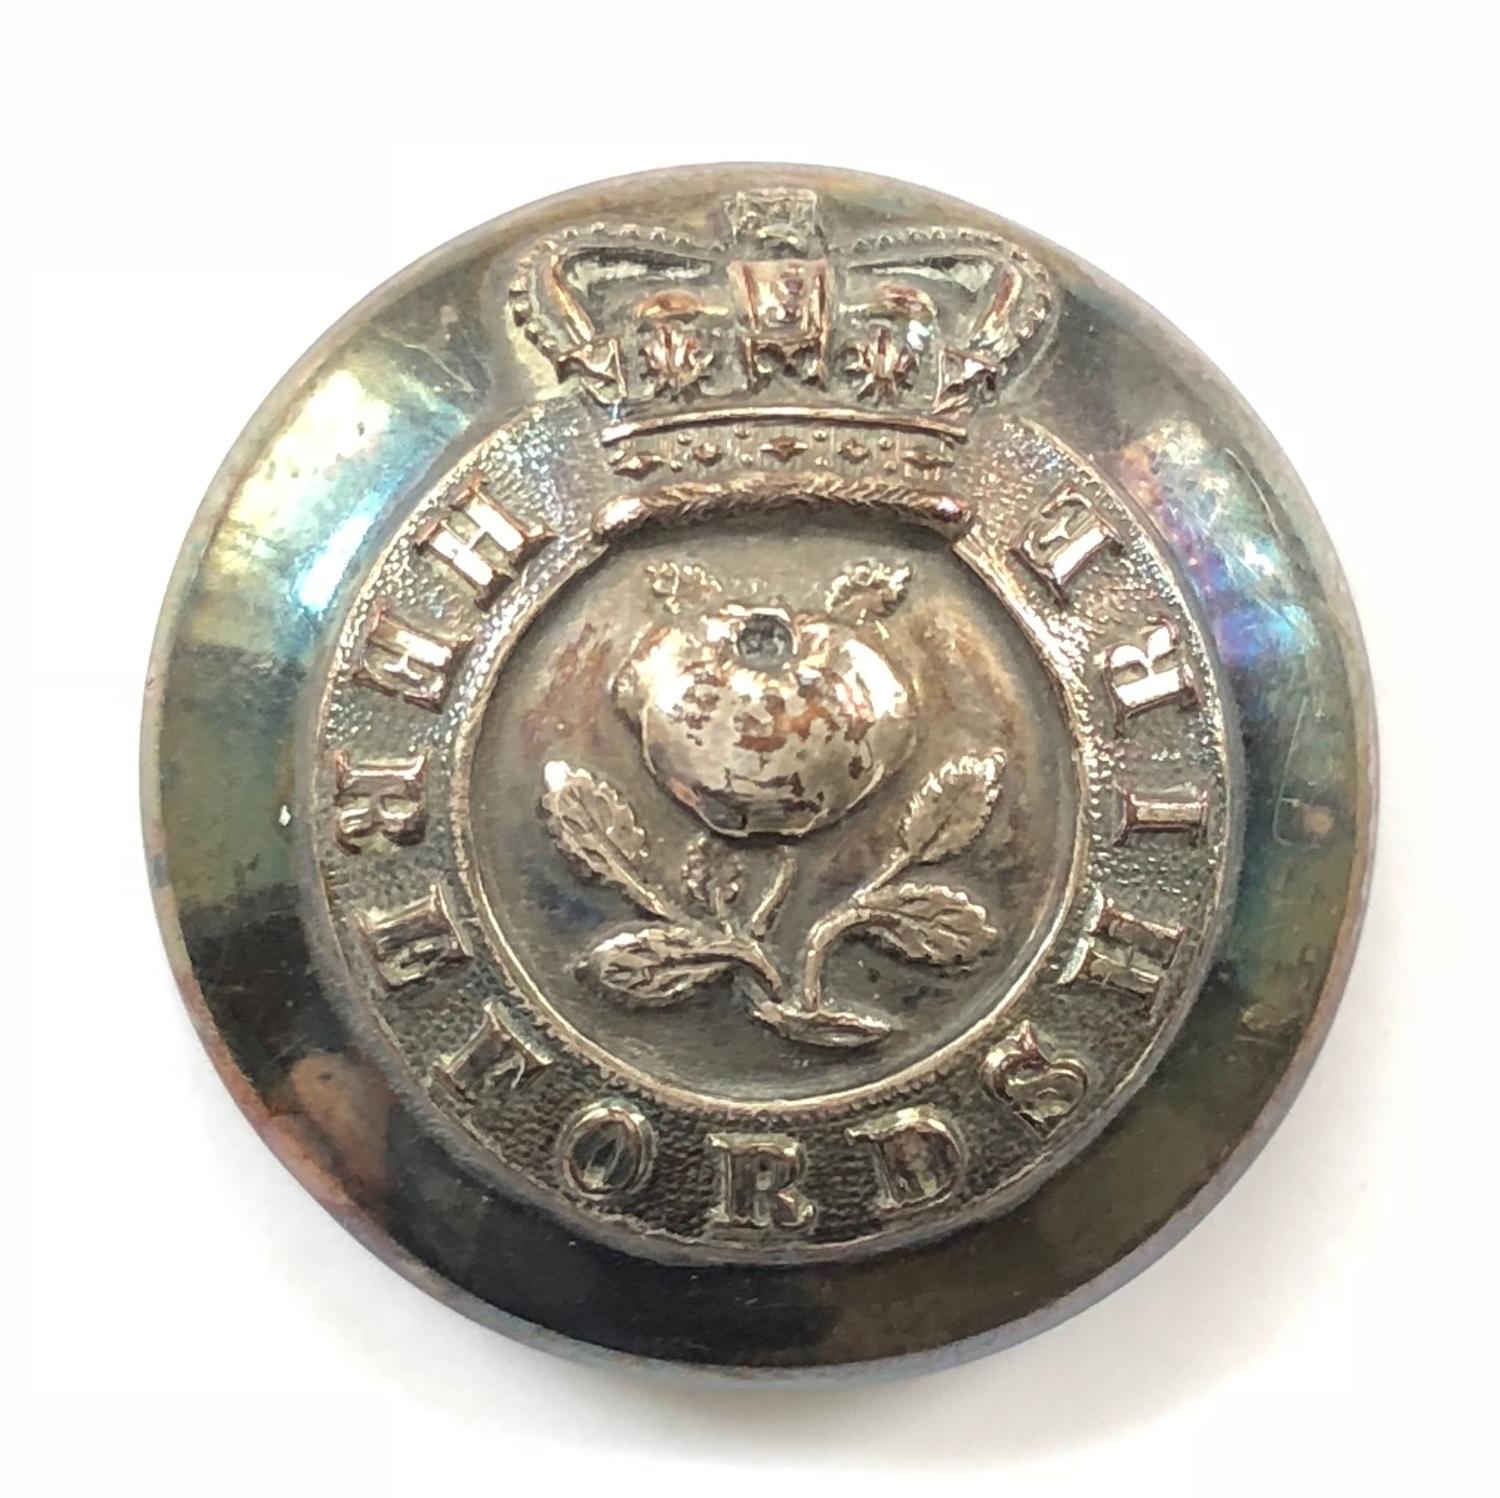 Hereford Militia Victorian Officer’s coatee button